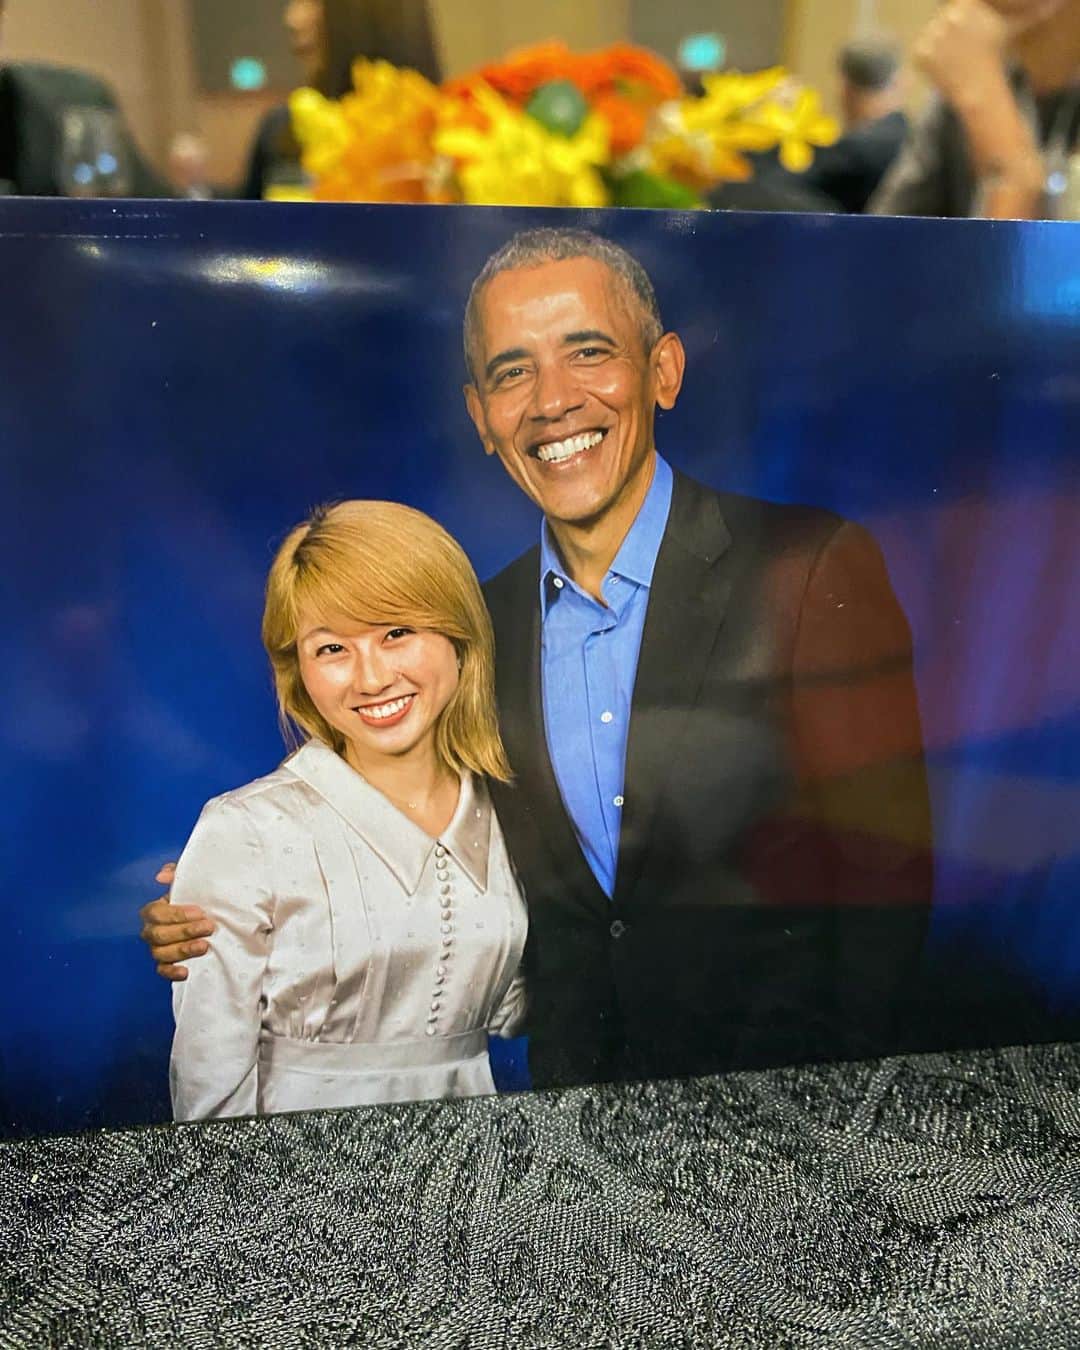 吉田ちかさんのインスタグラム写真 - (吉田ちかInstagram)「Got a photo with President Barack Obama! (Again, not at Madame Tussaud’s!) It’s just unbelievable all of the amazing opportunities being a YouTube creator has given me over the years. We had the privilege of sitting front and center at an event hosted by The Growth Faculty to hear about President Obama’s thoughts and approach on leadership and team building. ﻿ ﻿ As you can see in the photo he was so friendly and down to earth. We had a second to shake hands and snap a photo and I told him that this was the first trip I’ve taken without my 18 month old daughter and that her daddy is watching her. His smile got even friendlier and he replied “that must have been hard, but moms need a break too. That’s important.” For a split second I felt like  I was talking to an experienced parent, not the former President of the United States. He kept that relatableness (don’t think that’s a word) and human-ness (this one isn’t either) throughout his talk session and so much of what he shared about leadership and team building are things I need to apply to the next stage of my career. So much food for thought! A big thanks President Obama for sharing his stories and to the team at Google for giving me such an amazing opportunity! ﻿ ﻿ オバマ元大統領とまさかのツーショット！本物です！マダムタッソーじゃないよ🤣この前言ってたスペシャルなイベントはこちらでした！YouTuberになってこんなにも色んな貴重な体験をできるなんて(いつも言いますがw) 本当に人生って何が起きるかわからない！今回はThe Growth Faculty主催のイベントでオバマ元大統領のリーダーシップやチーム作りに関するお話を最前列で聞かせてもらいました！﻿ ﻿ 写真でもわかる通り、実際もとっても優しくて気さくな方。一瞬でしたが撮影会で「今回初めて娘を置いて来たんです。今パパが見てくれています。」と伝えたら表情がよりフレンドリーになり、「それは大変だったね。でも、ママも休まないと。大事だよ。」と温かく言ってくれました。その瞬間はアメリカの元大統領と話しているのではなく、経験のあるパパと話している感じでした。﻿ ﻿ トークセッション自体も(国を動かす想像もできない規模感は置いといてw) 親近感が湧くように色々とお話してくださり、リーダーシップそしてチーム作りに関するお話は自分のキャリアの次のステージに活かさないといけないことばかりで色々と考えさせられました。(英語で書いてる”food for thought”は、考えるための材料という意味です☆) ﻿ ﻿ イベントは撮影禁止だったのでシェアできませんが、より詳しい内容と感想は動画でシェアできたらと思います！﻿ ﻿ #ママに一人旅させてくれたおさるさんとプリンに感謝❤️」12月17日 15時28分 - bilingirl_chika